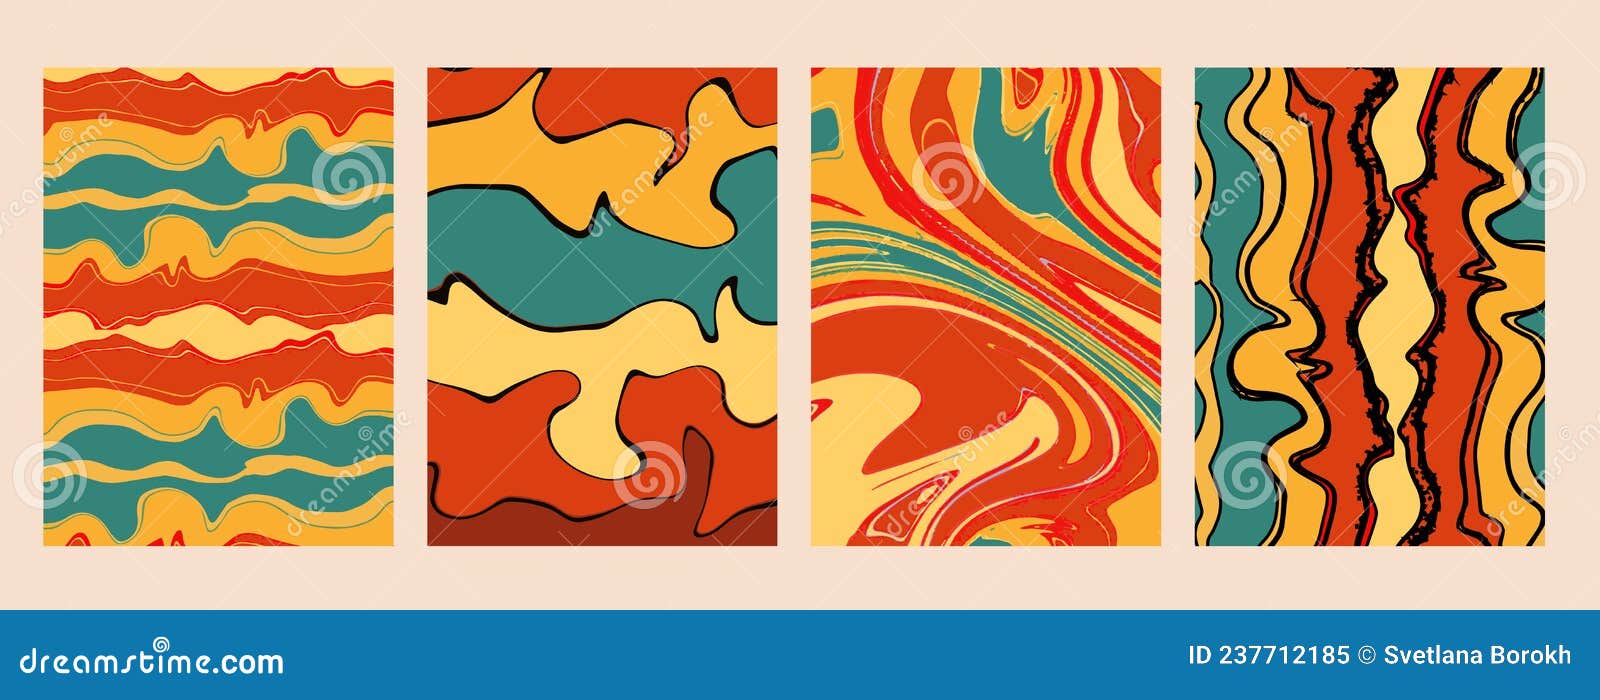 Psychedelic Waves Pattern Retro 70s Set of Posters, Backgrounds for ...